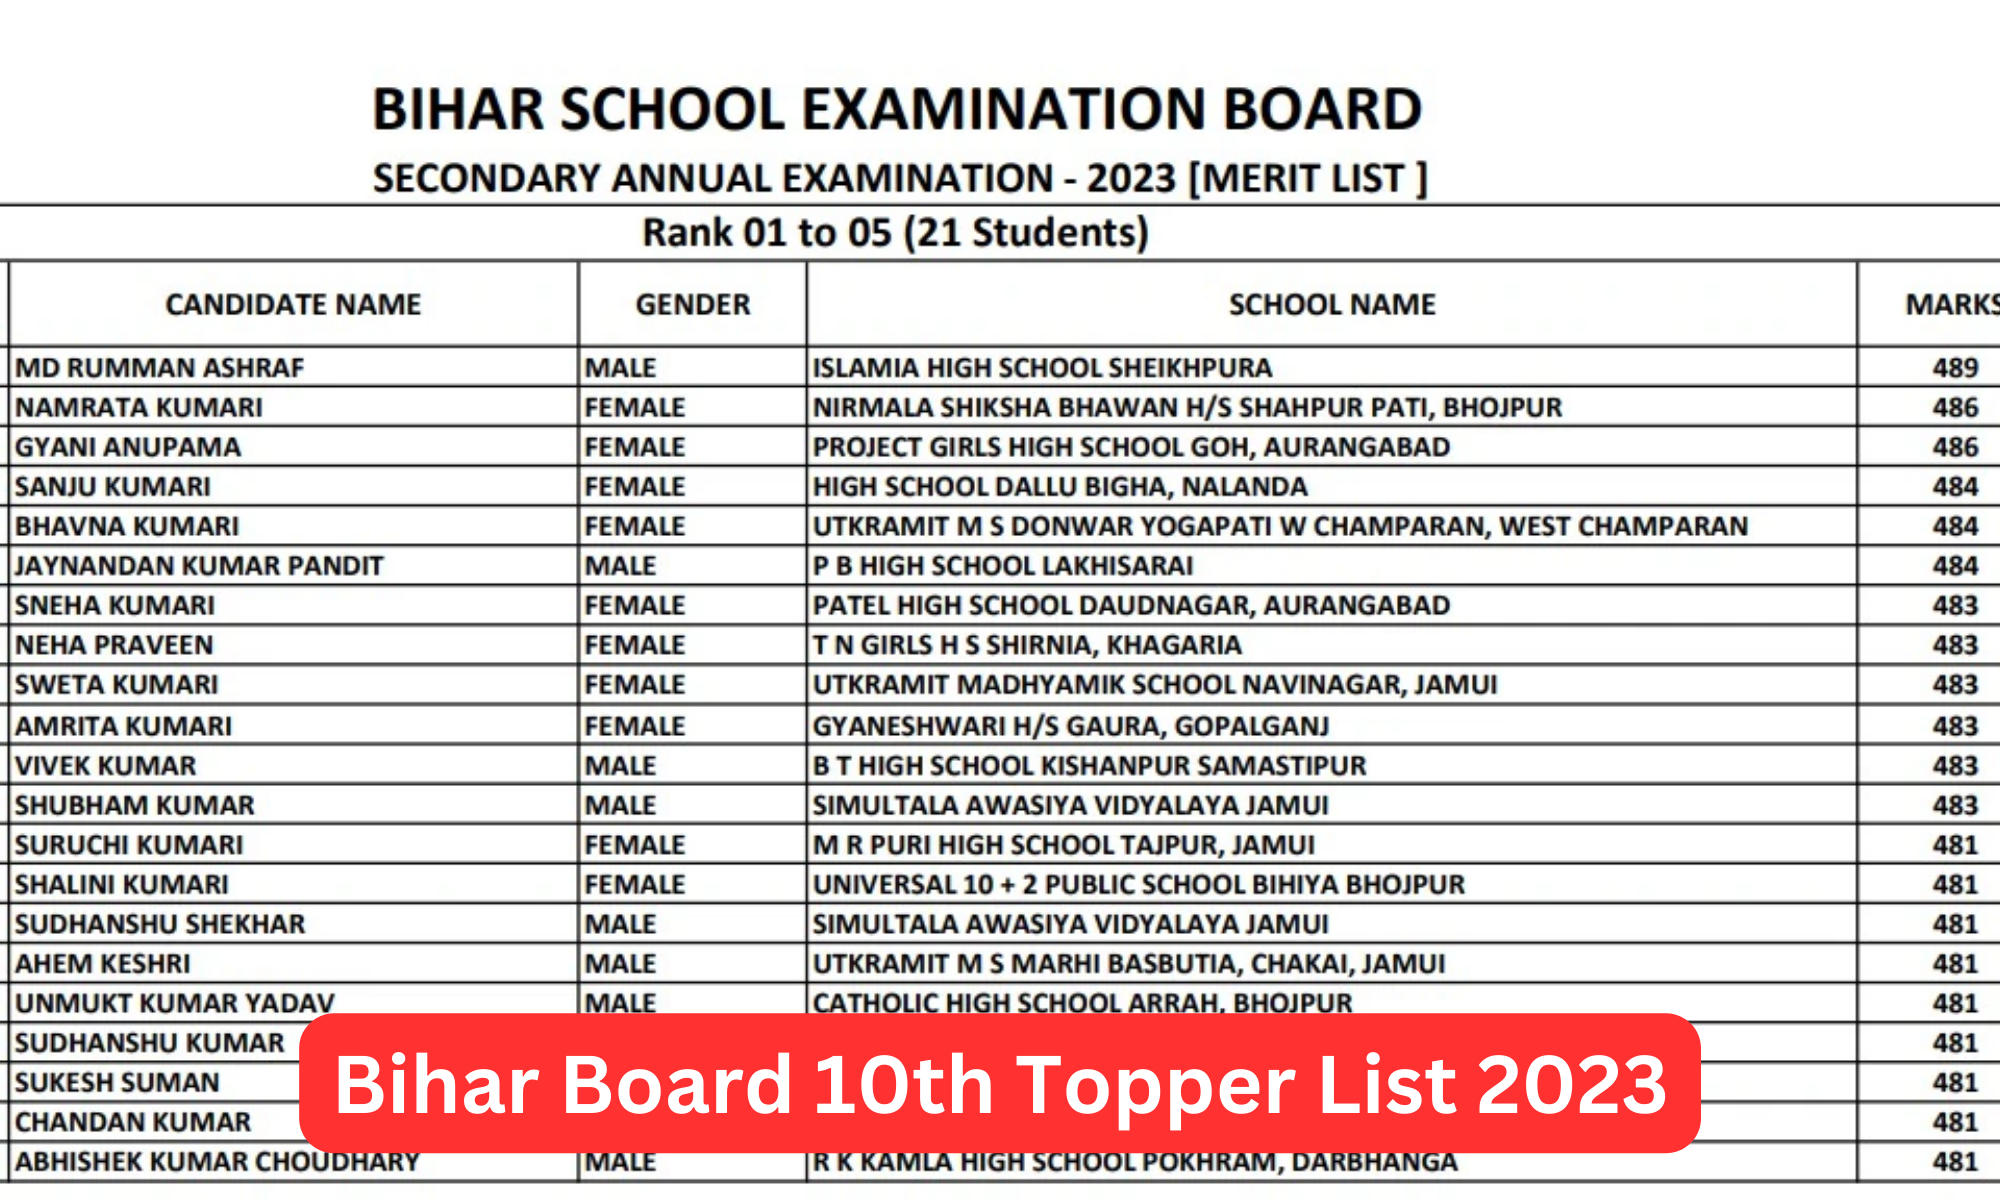 Bihar Board 10th Topper List 2023: Check out the Full List of BSEB Board 10th Toppers_40.1